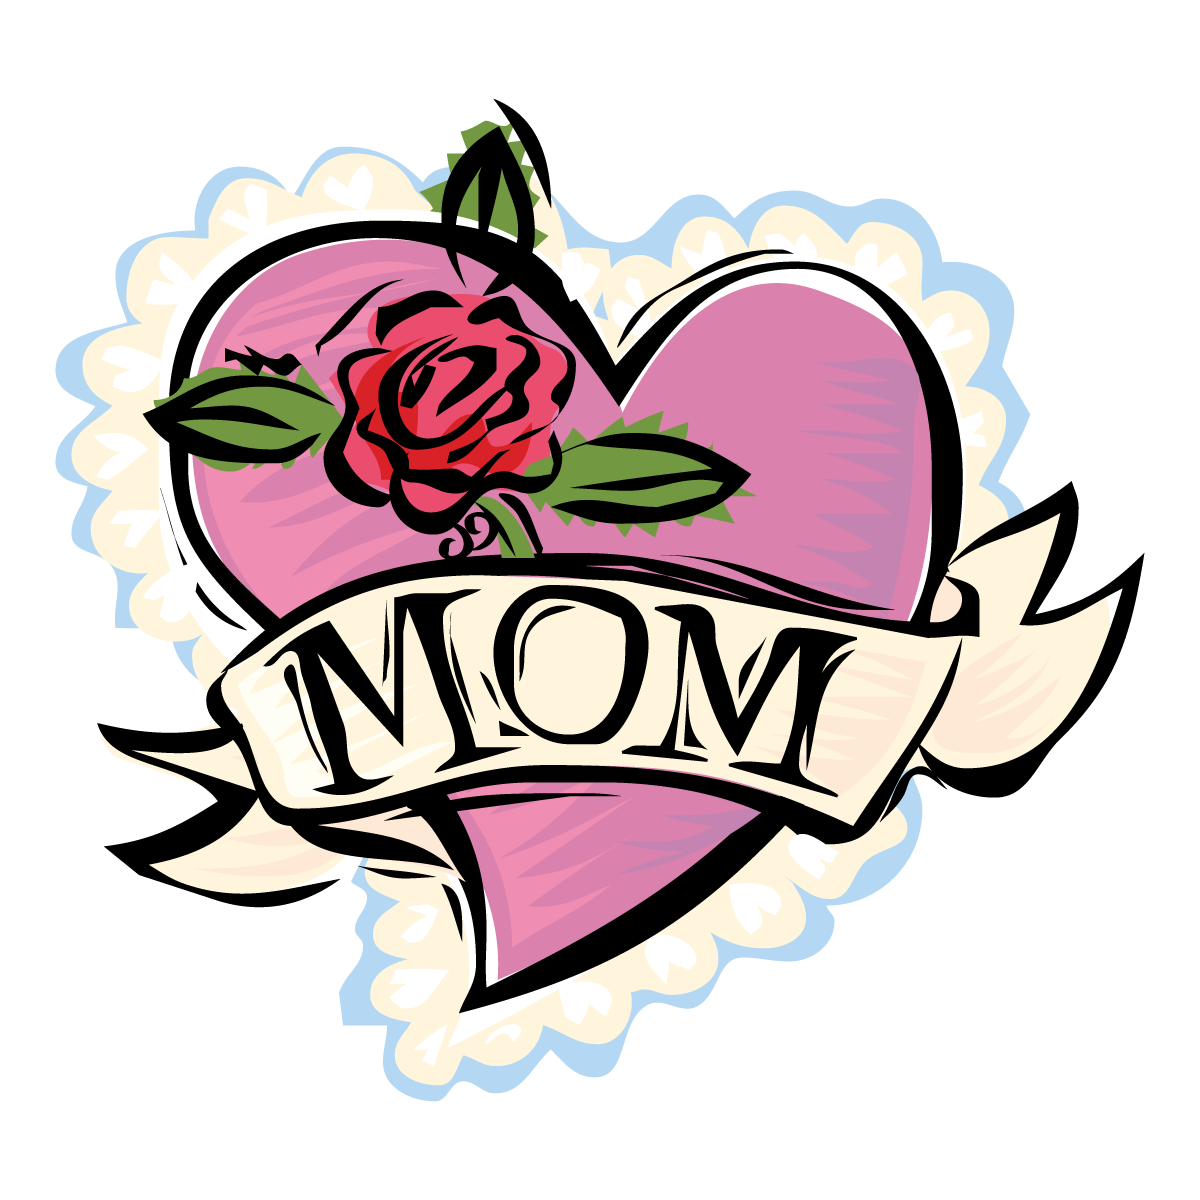 Mother day heart clipart.